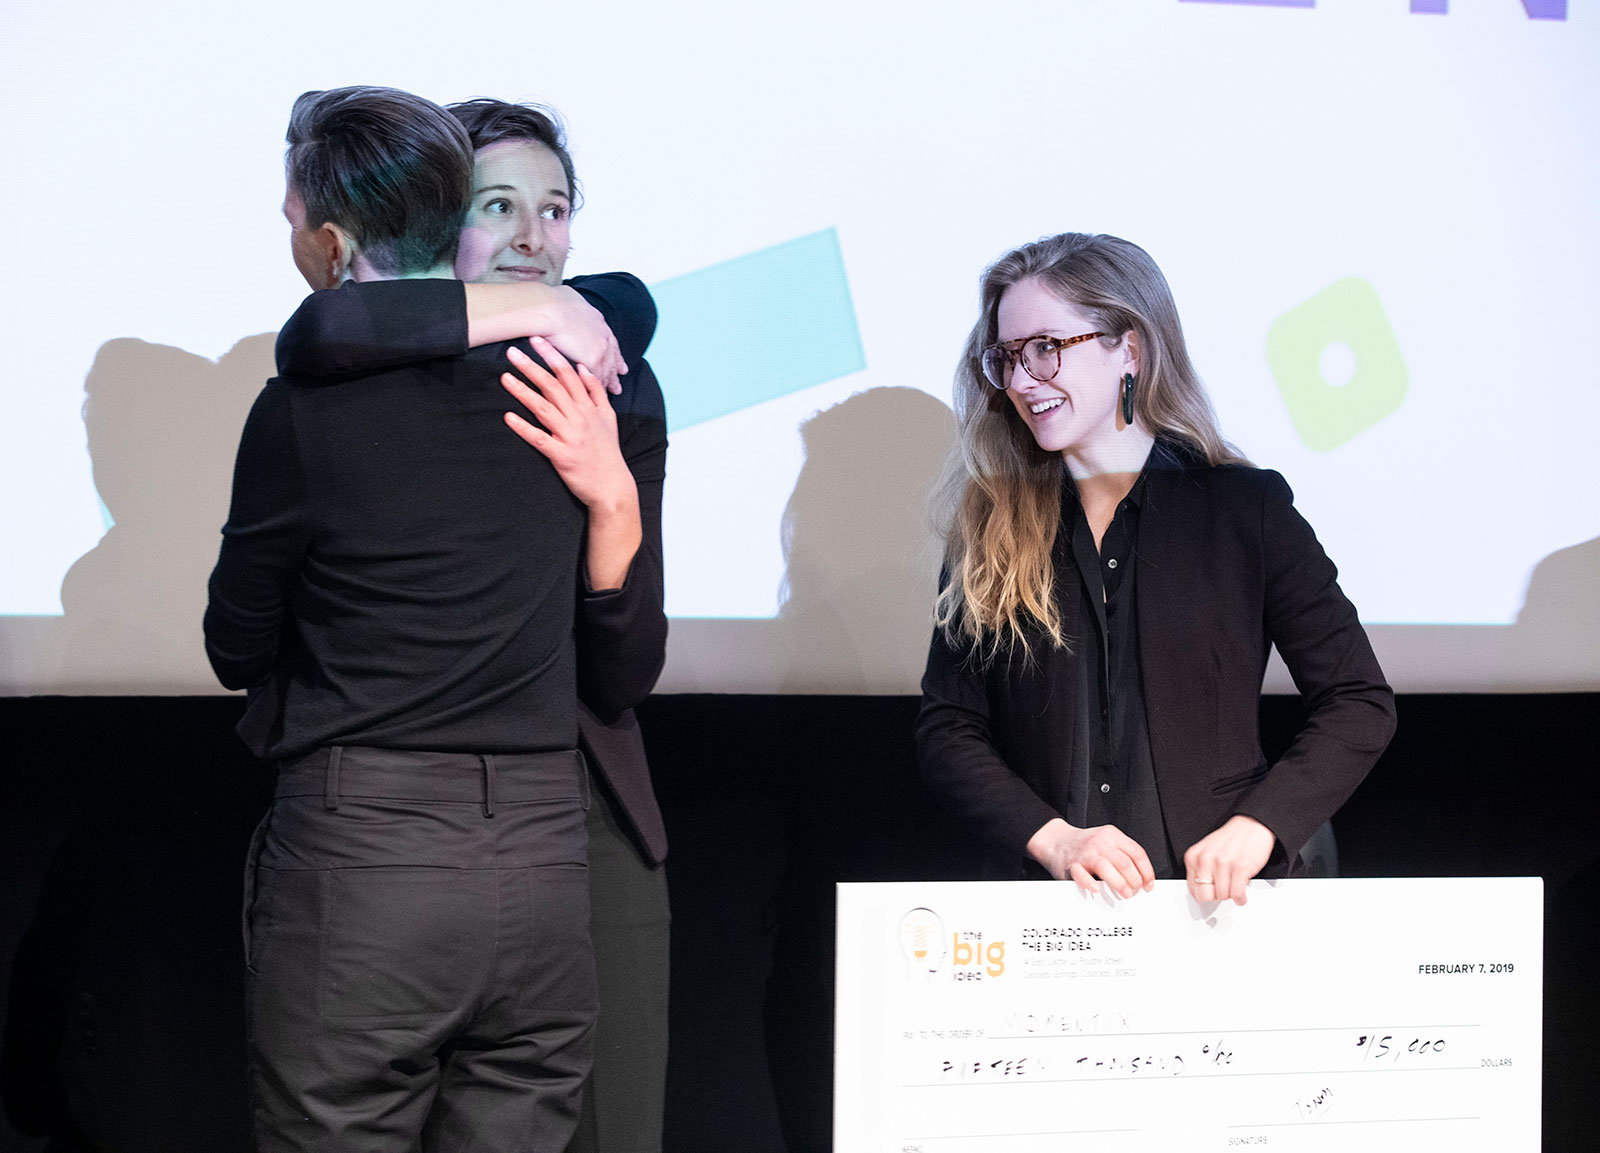 Anna Gilbertson '19 and Alana Aamodt '18 celebrate their first place win. Four teams competed in the final round of the Big Idea, a startup competition hosted by Innovation @ CC on Feb. 7m 2019 in Celeste Theater. The competing teams were SaFire, Advanced Water Sensing, Momentix and Infinite Chemistry. The teams competed for $25,000. First place went to Momentix while Advanced Water Sensing took second place. <span class="cc-gallery-credit"></span>